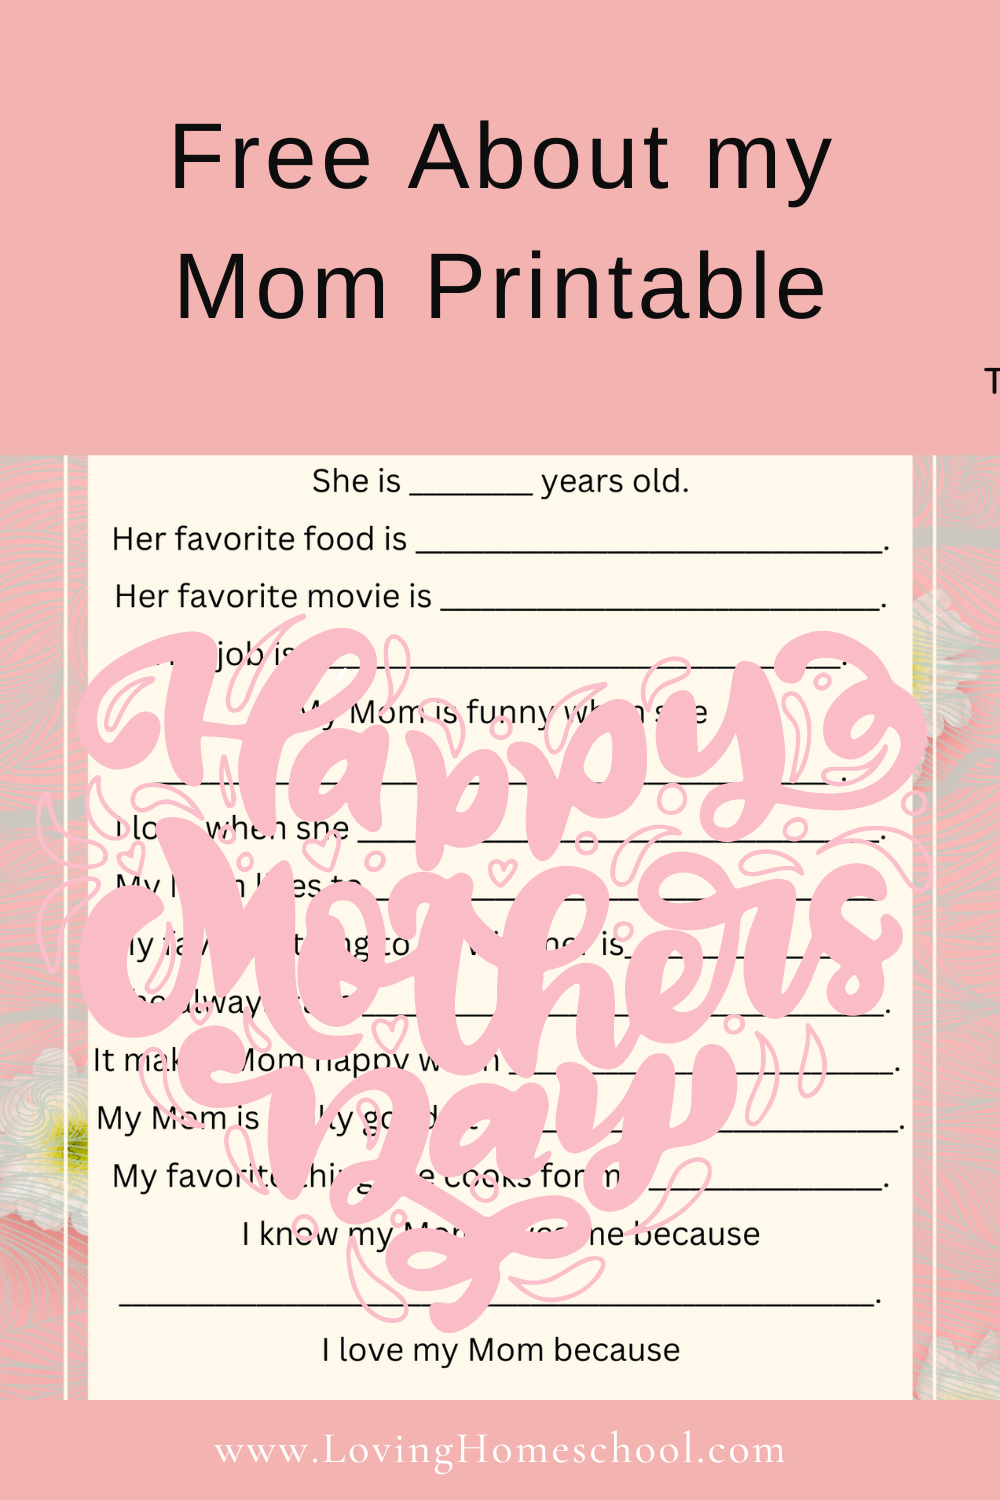 About my Mom Printable Pinterest Pin